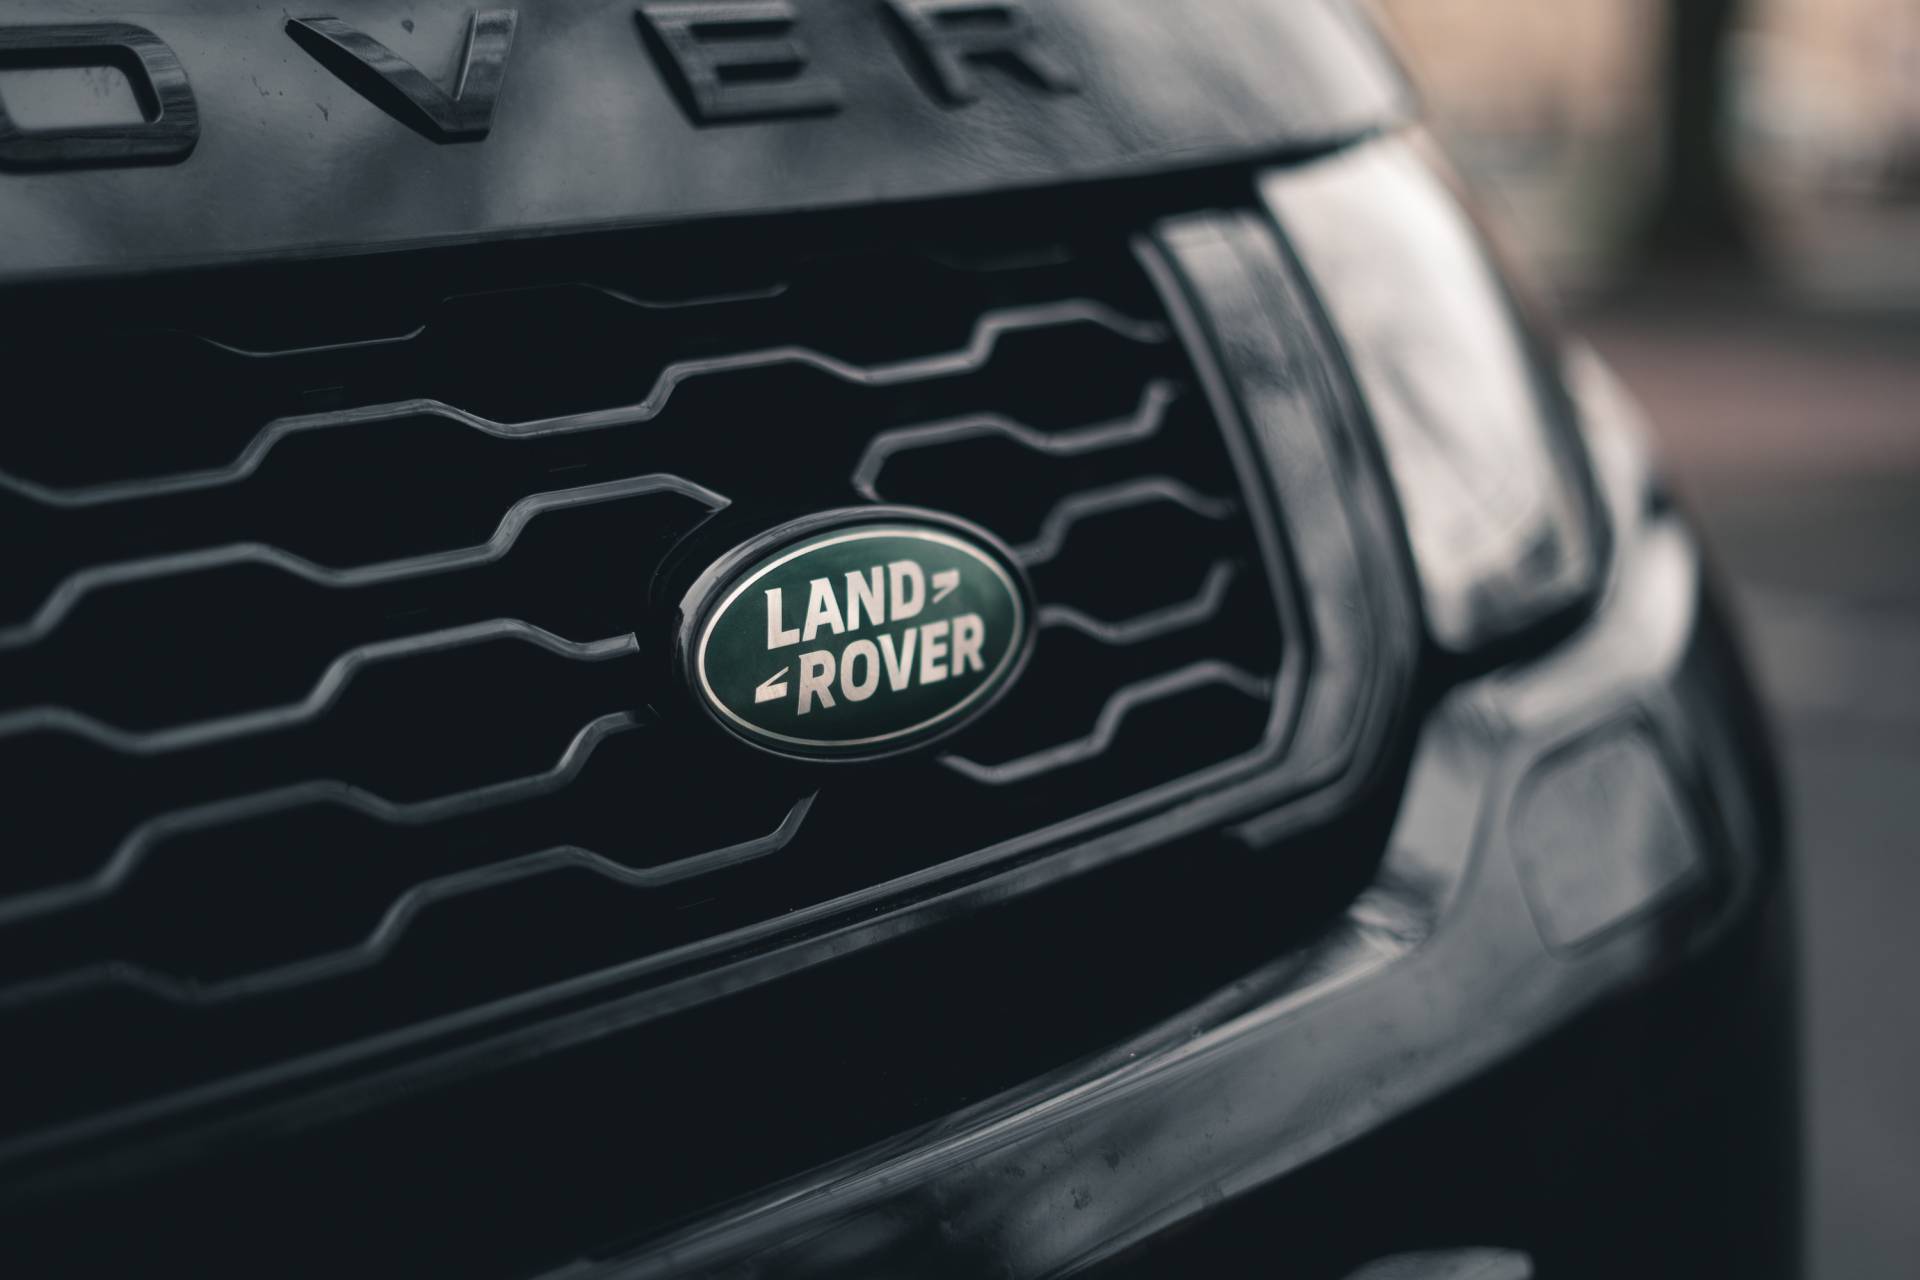 Green Revolutions: A Sneak Peek at the Electric Land Rover Defender Coming in 2027